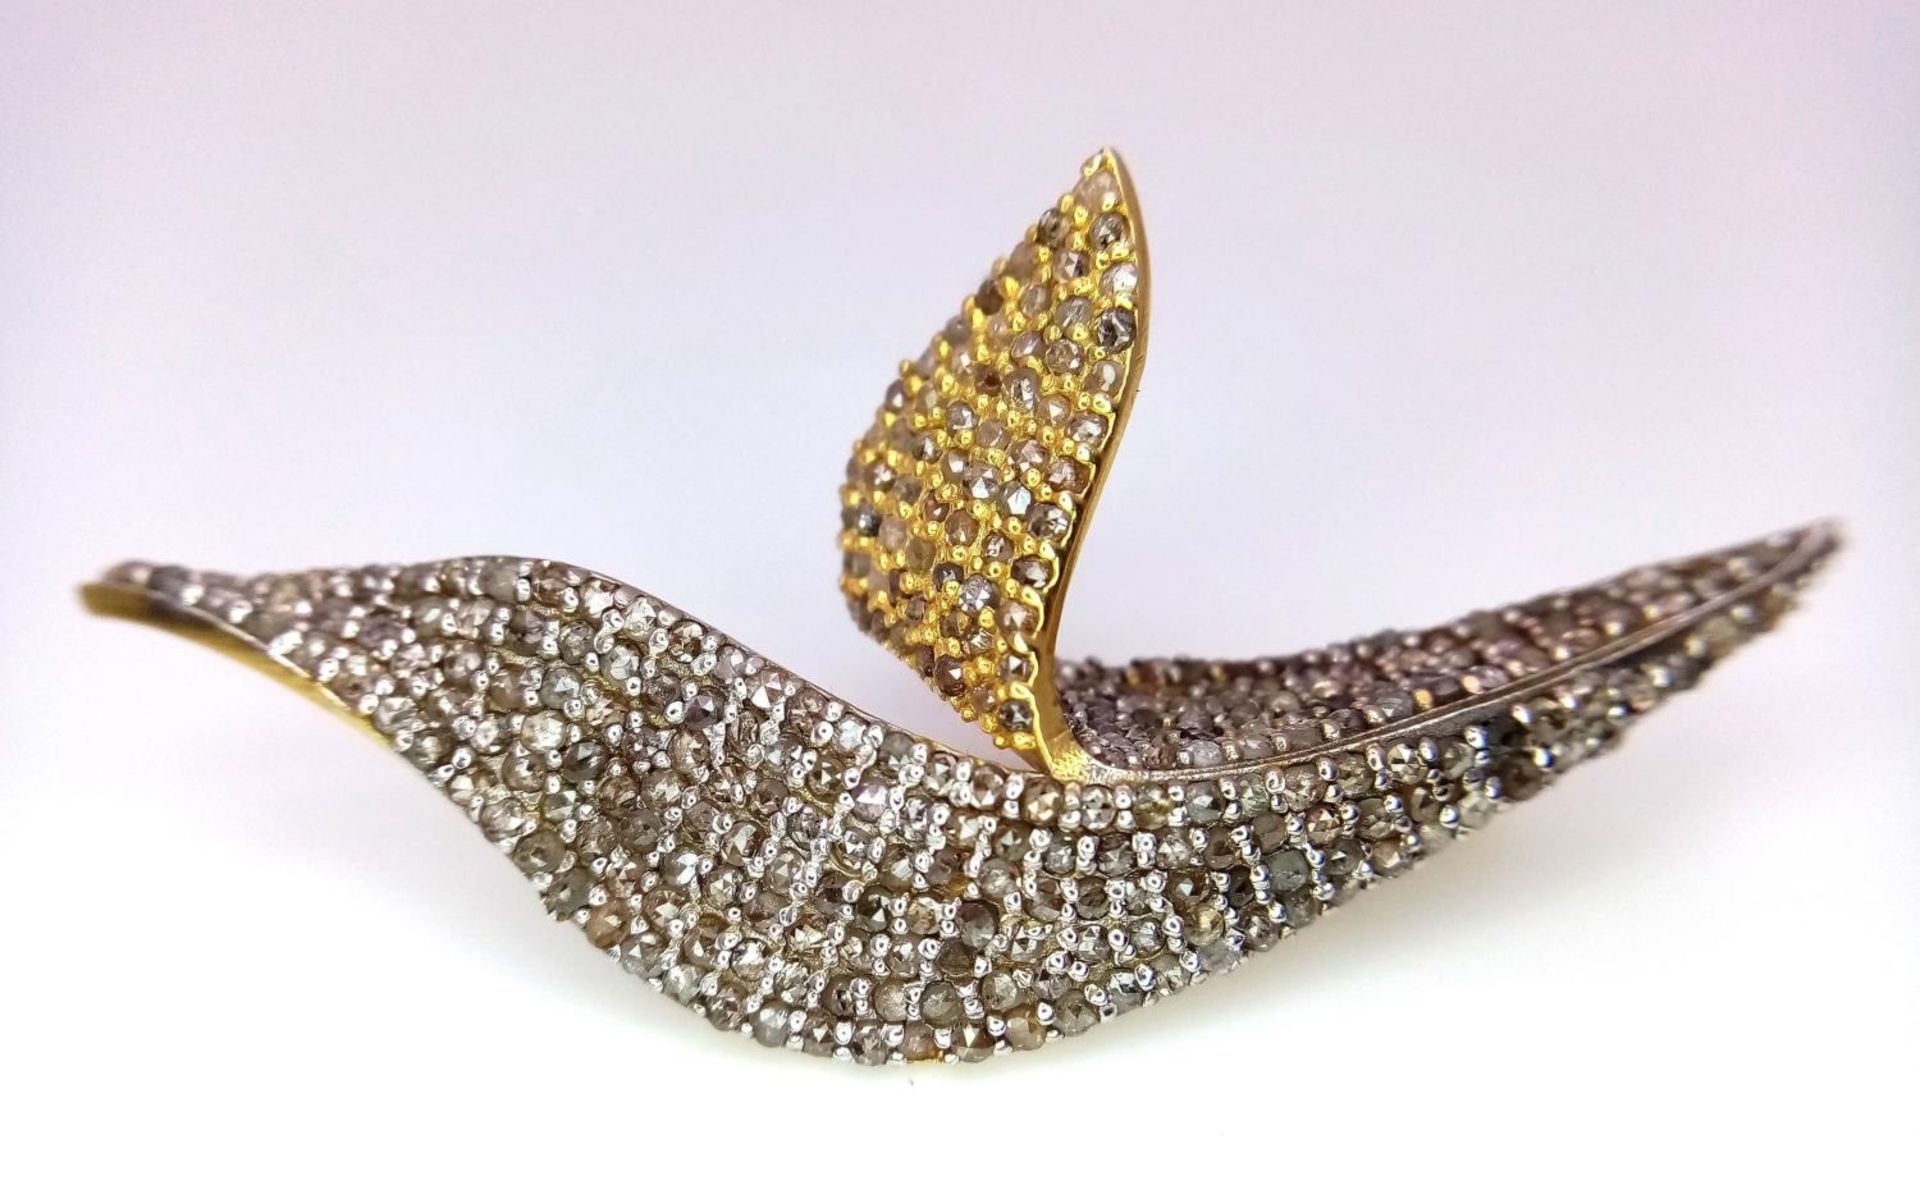 A Diamond Two Tone Leaf Cluster Brooch with 2ctw of Diamonds. Set in 925 Silver. 6g total weight.